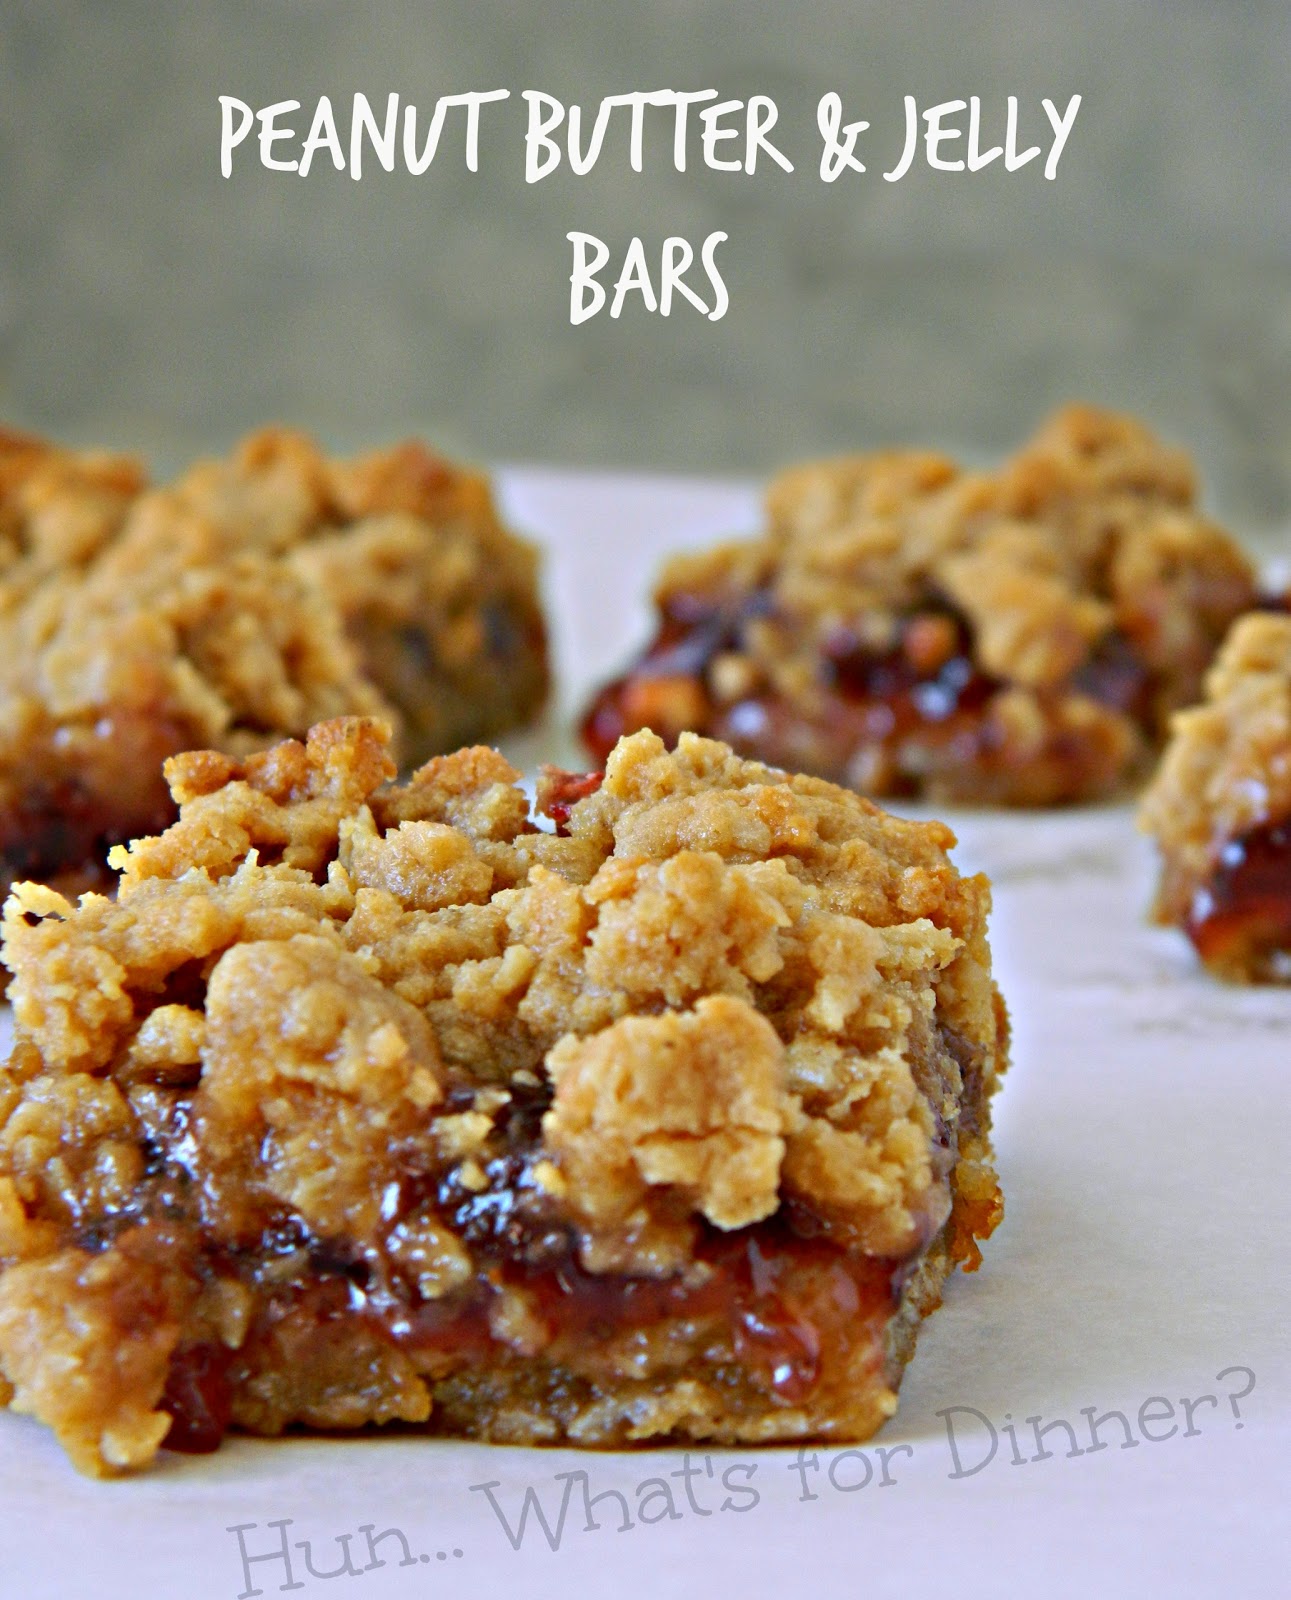 Hun... What's for Dinner? | Peanut Butter & Jelly Bars- These soft and chewy oatmeal peanut butter bars, have a gooey sweet layer of strawberry jam in the centre.